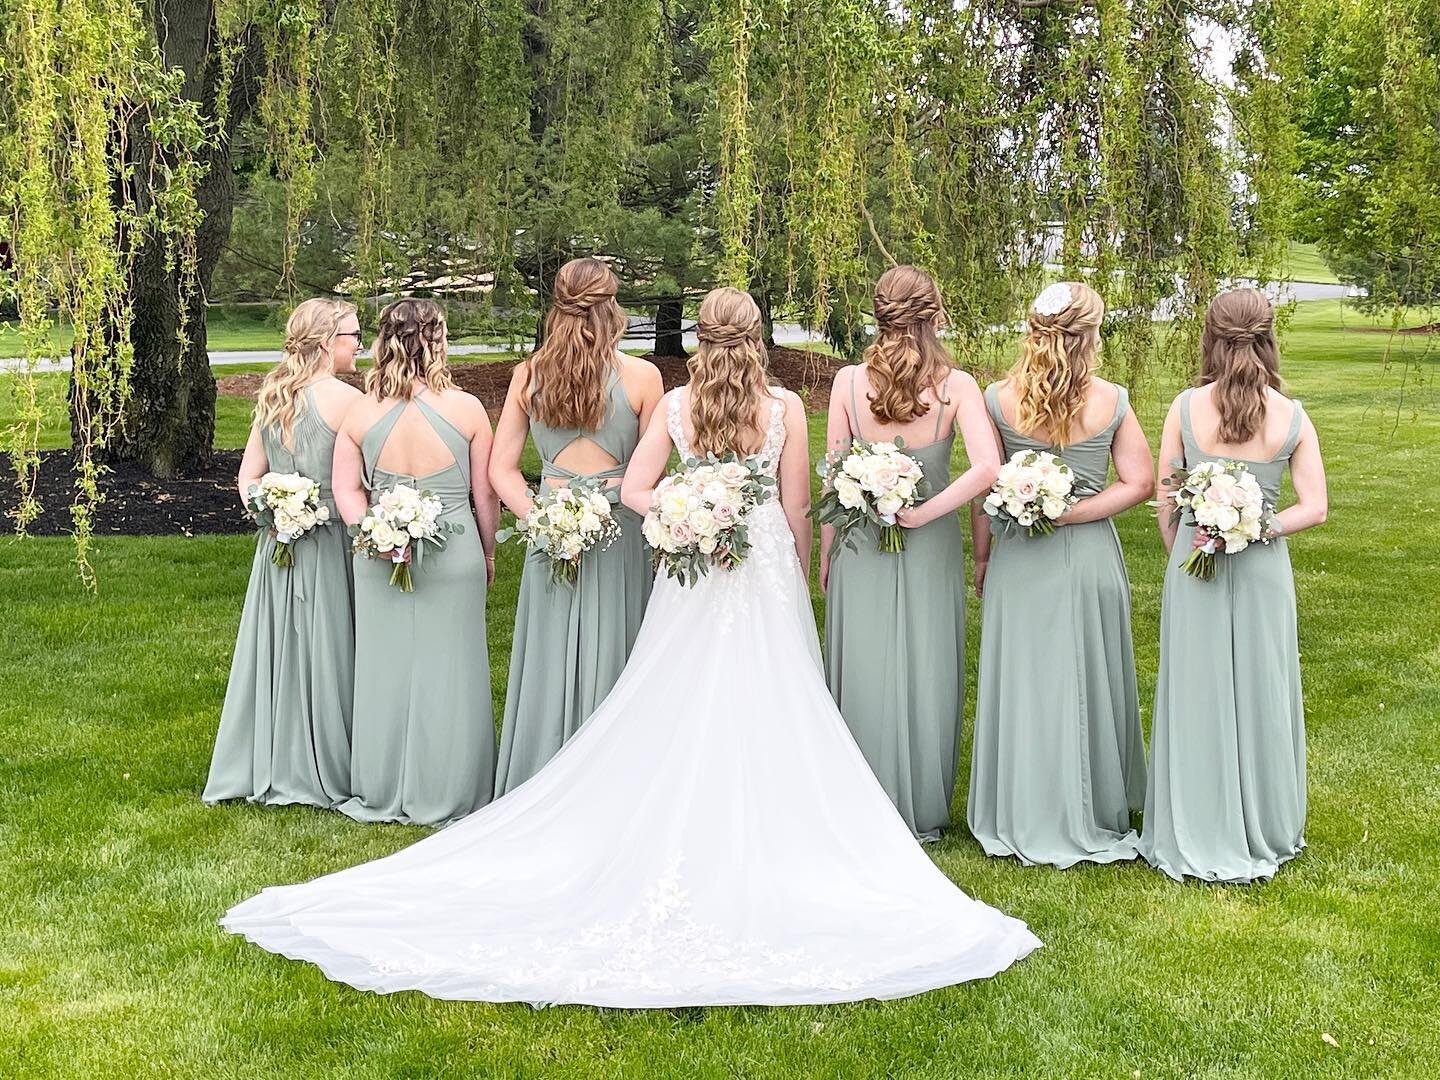 It was such a joy styling hair for this bridal party! And how gorgeous are their dresses against the lush springtime greenery?! 😍